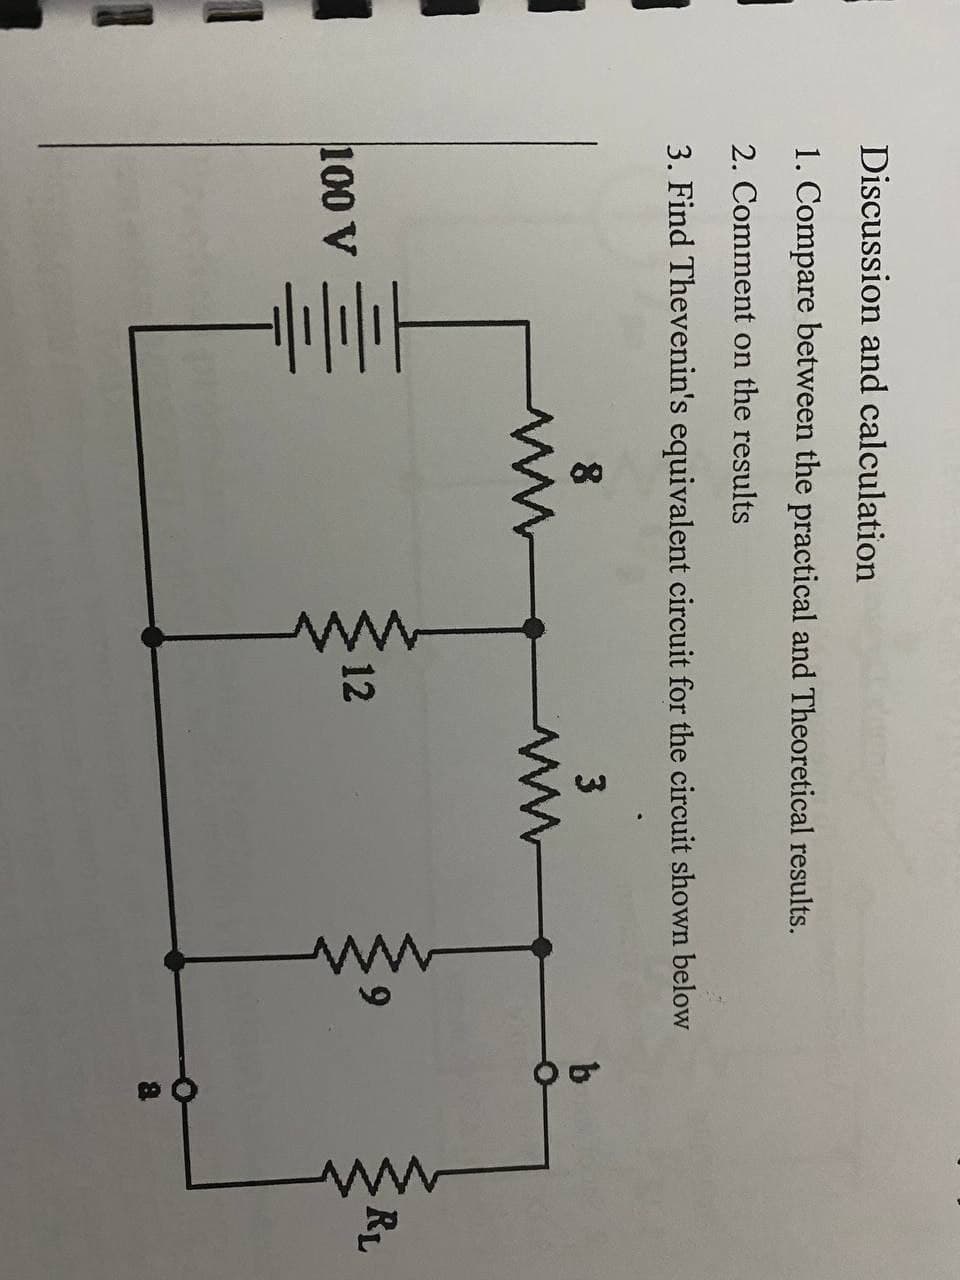 Discussion and calculation
1. Compare between the practical and Theoretical results.
2. Comment on the results
3. Find Thevenin's equivalent circuit for the circuit shown below
b
8
ww
6.
RL
12
100 V
